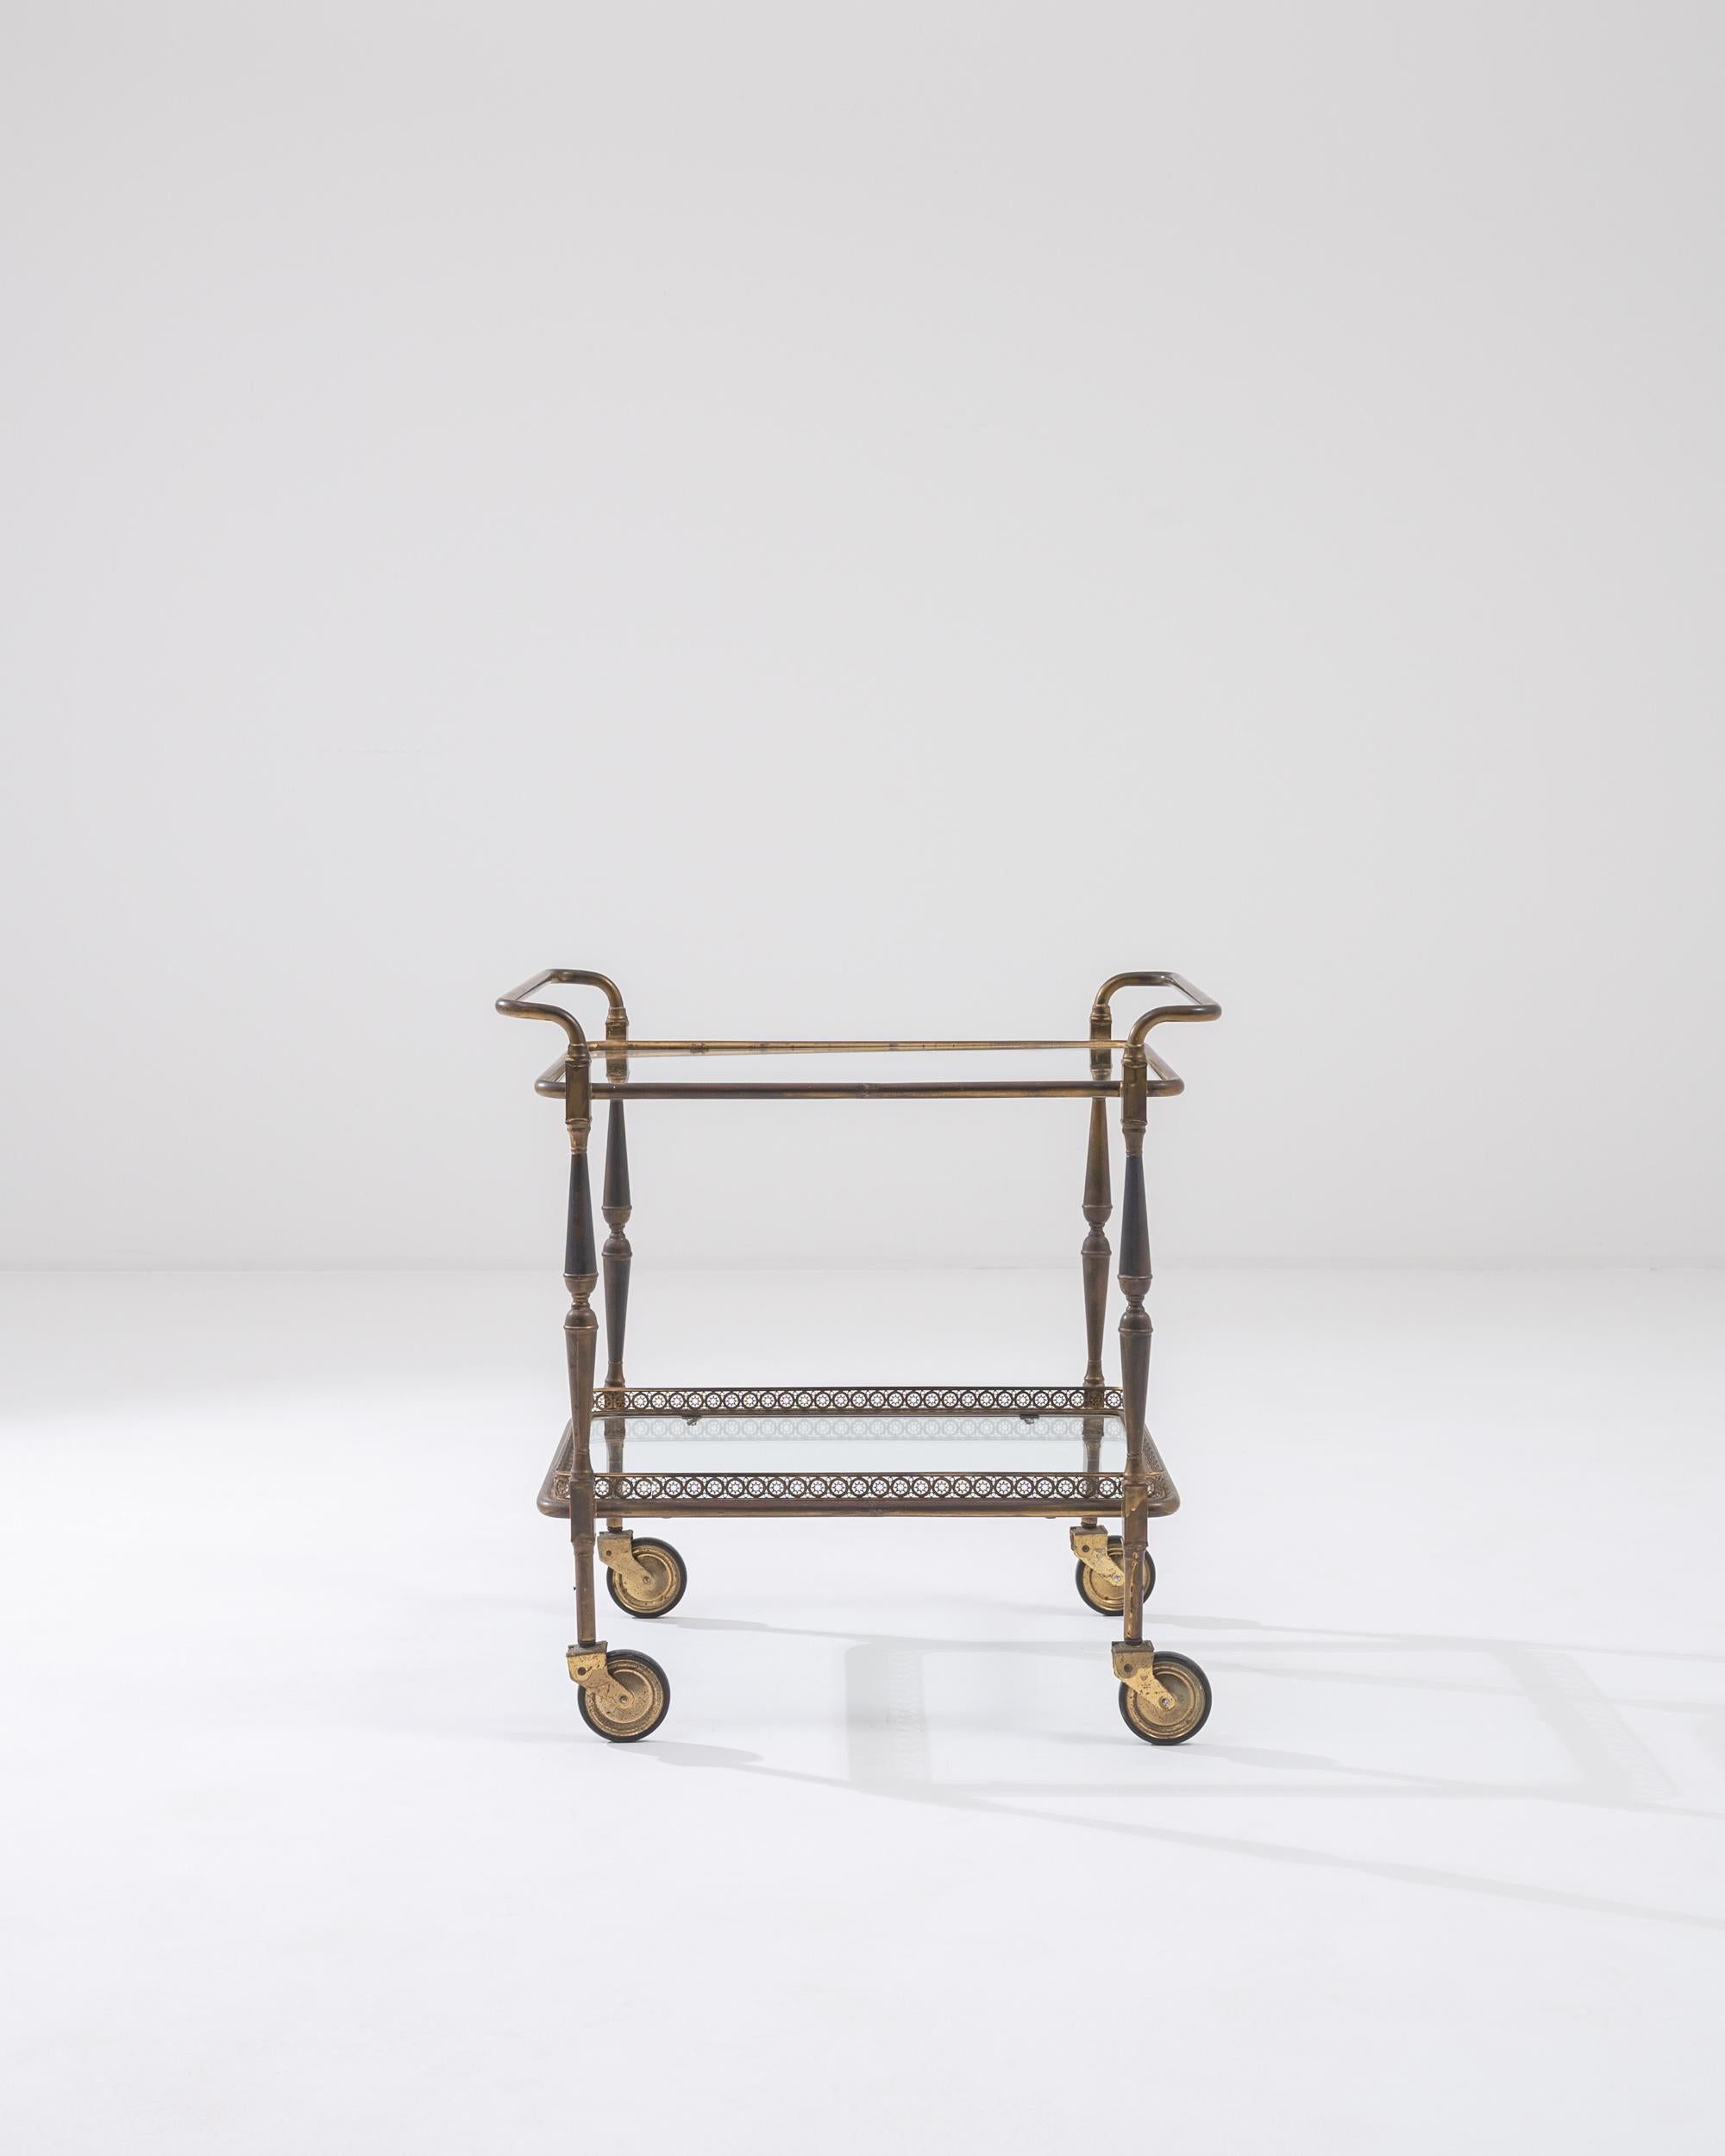 A metal bar cart created in 20th century France. With tastefully rounded brass tubes and sumptuously spindled legs, this speedy little bar cart offers both a practical and playful companion. Through its age and experience, a light and eye-pleasing